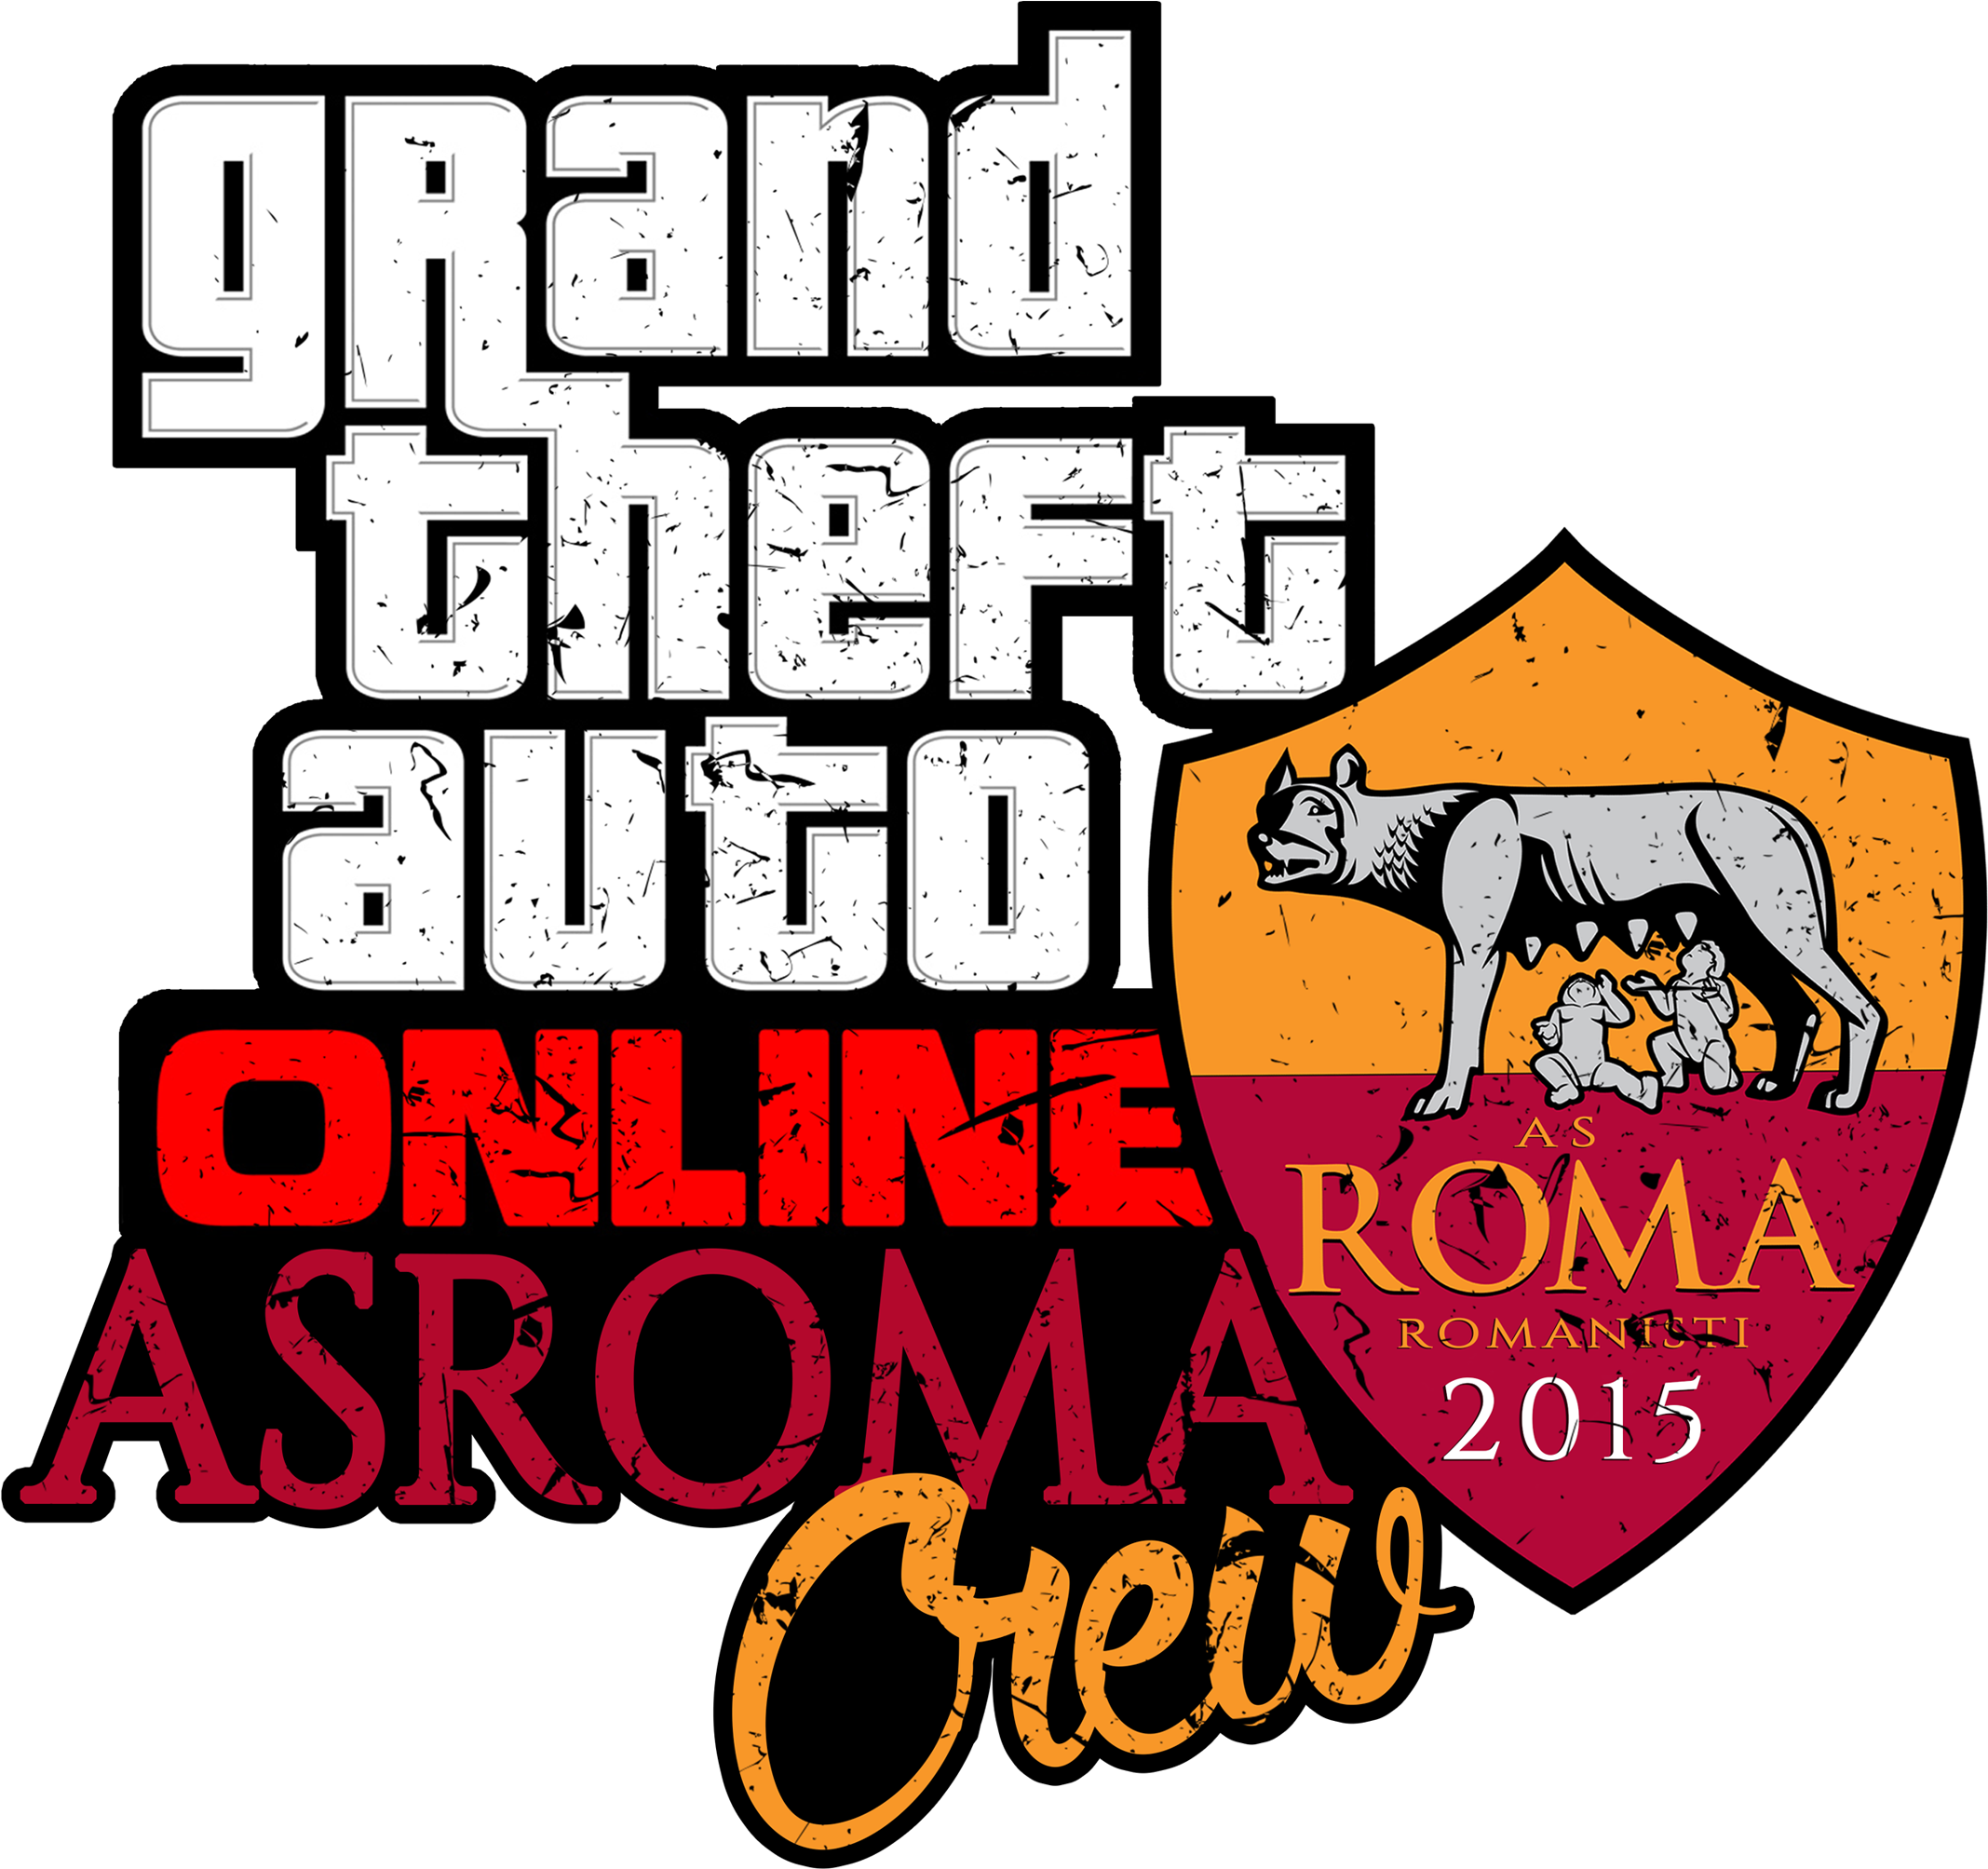 As Roma Romanisti Crew Official Gta Online - As Roma Romanisti Crew Official Gta Online (2373x2231)